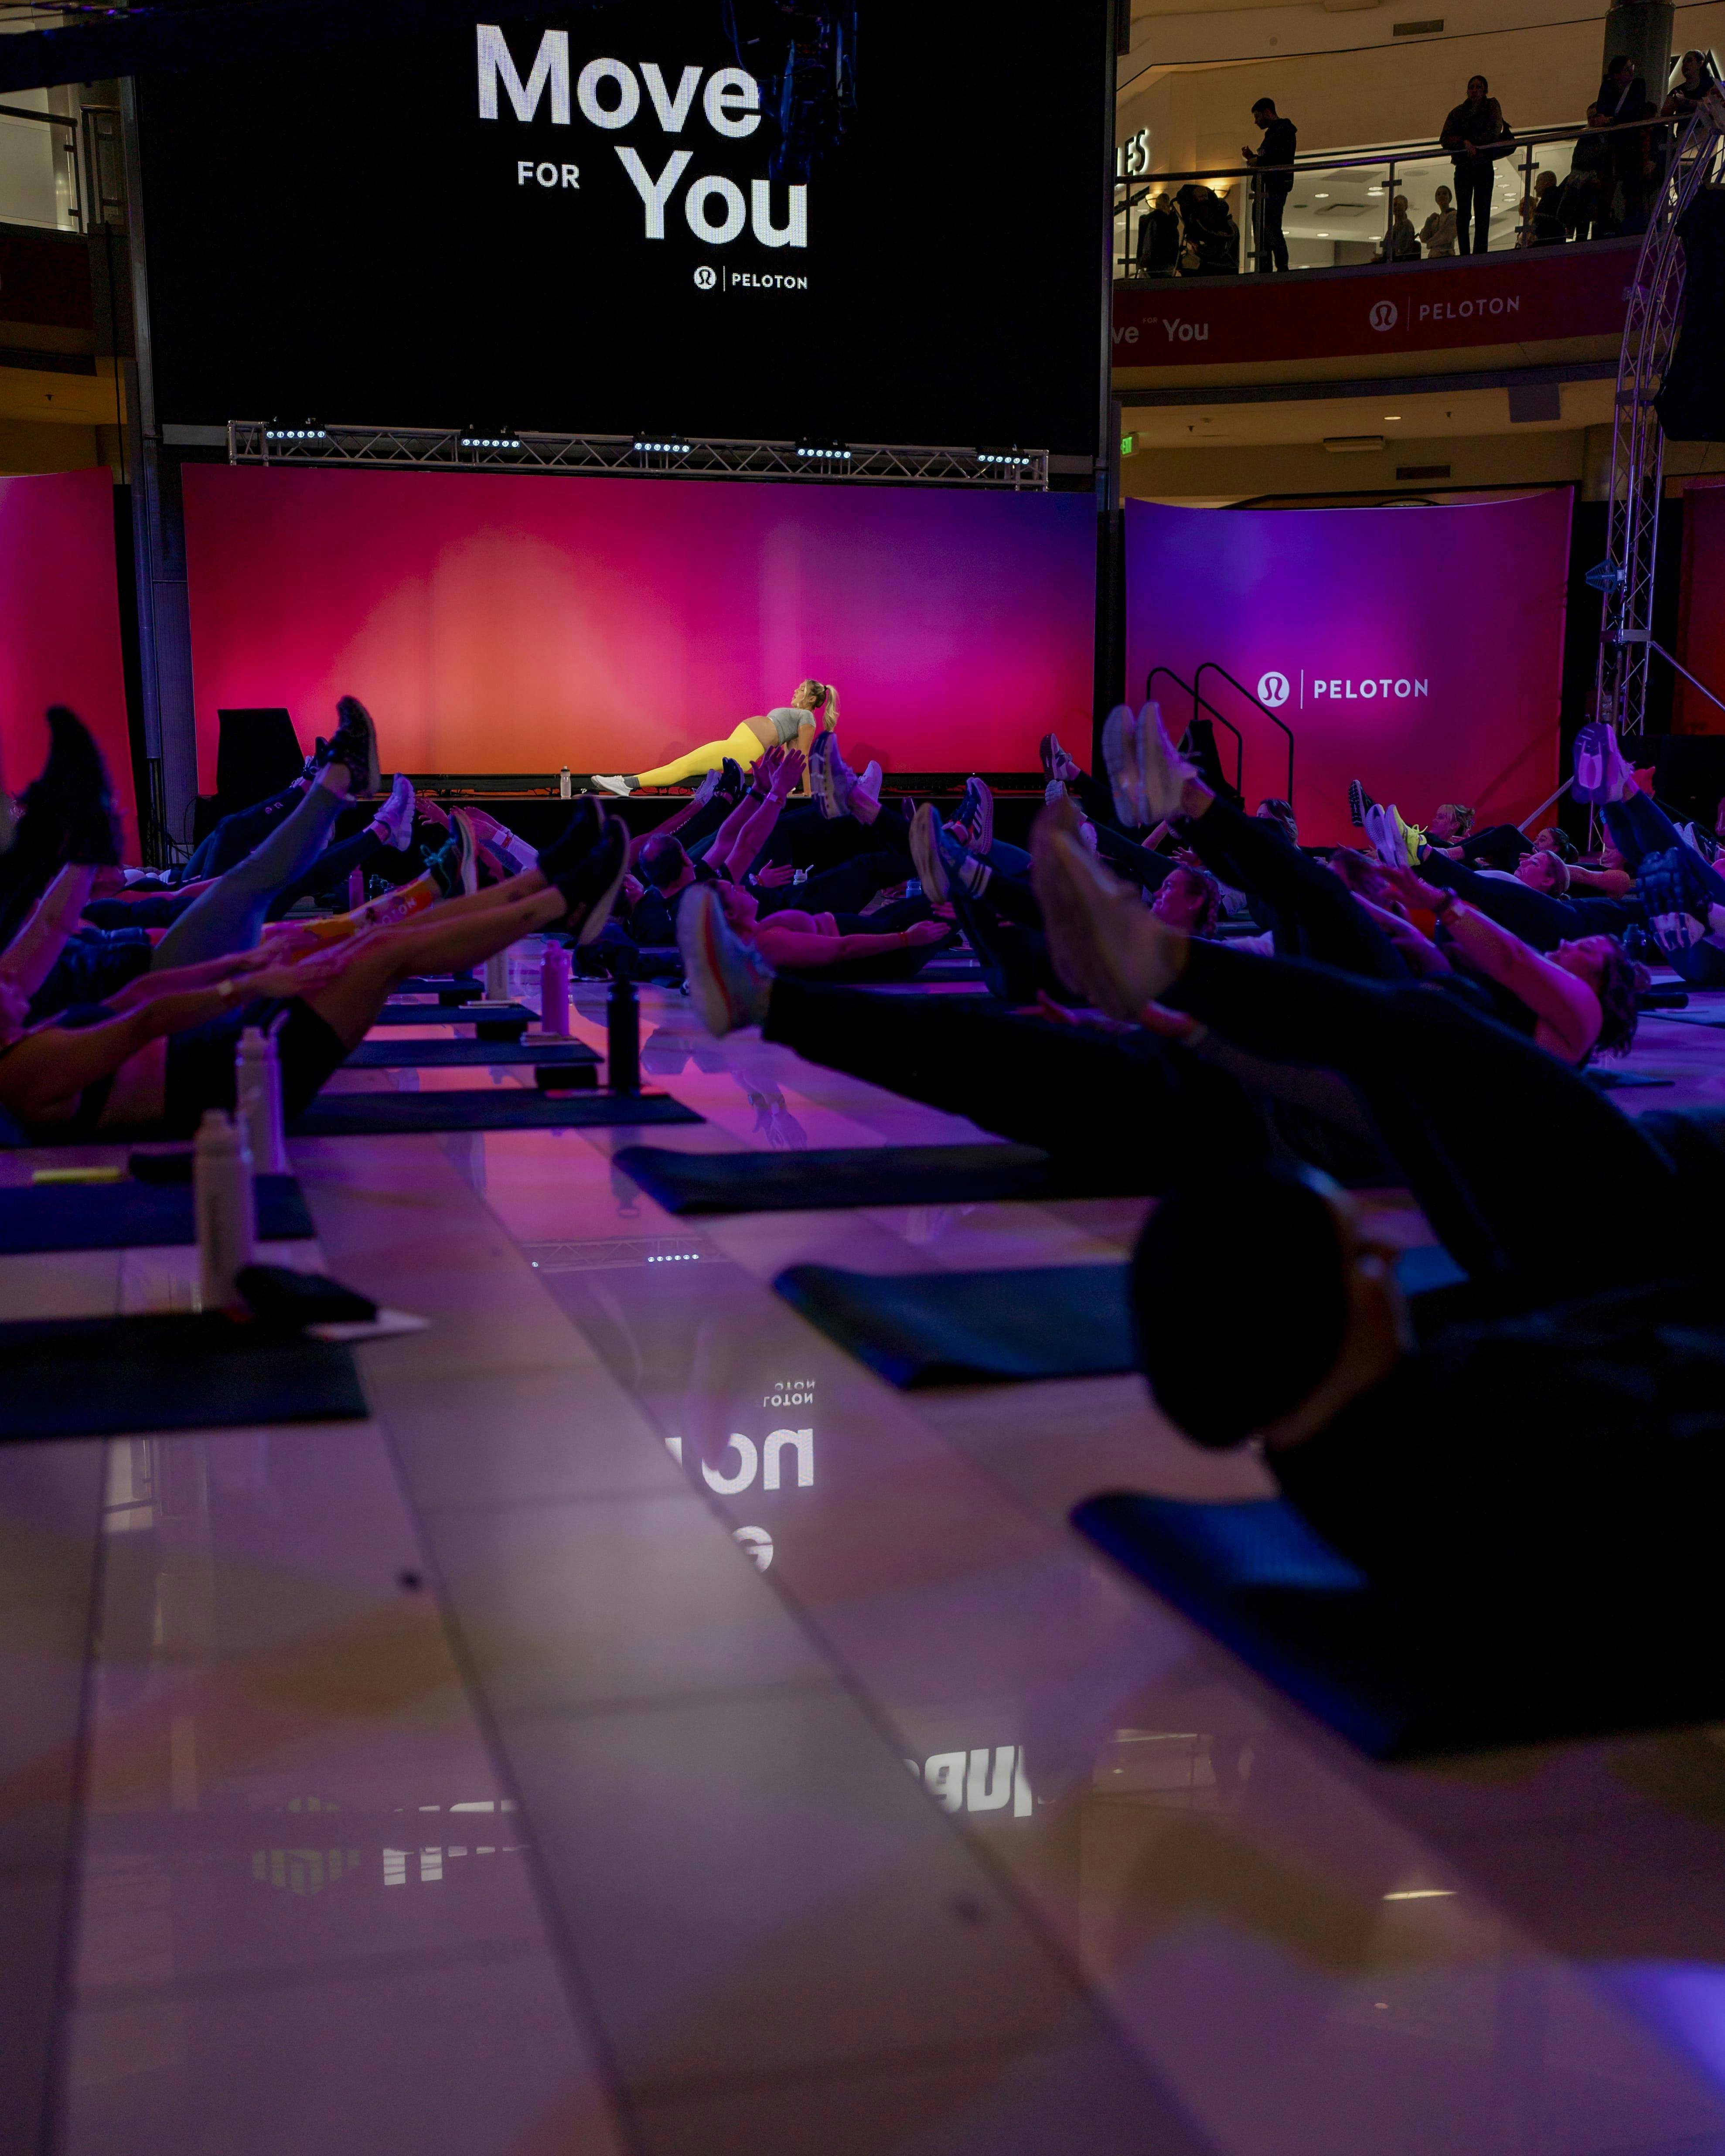 Peloton Move For You Event with lululemon at Mall of America